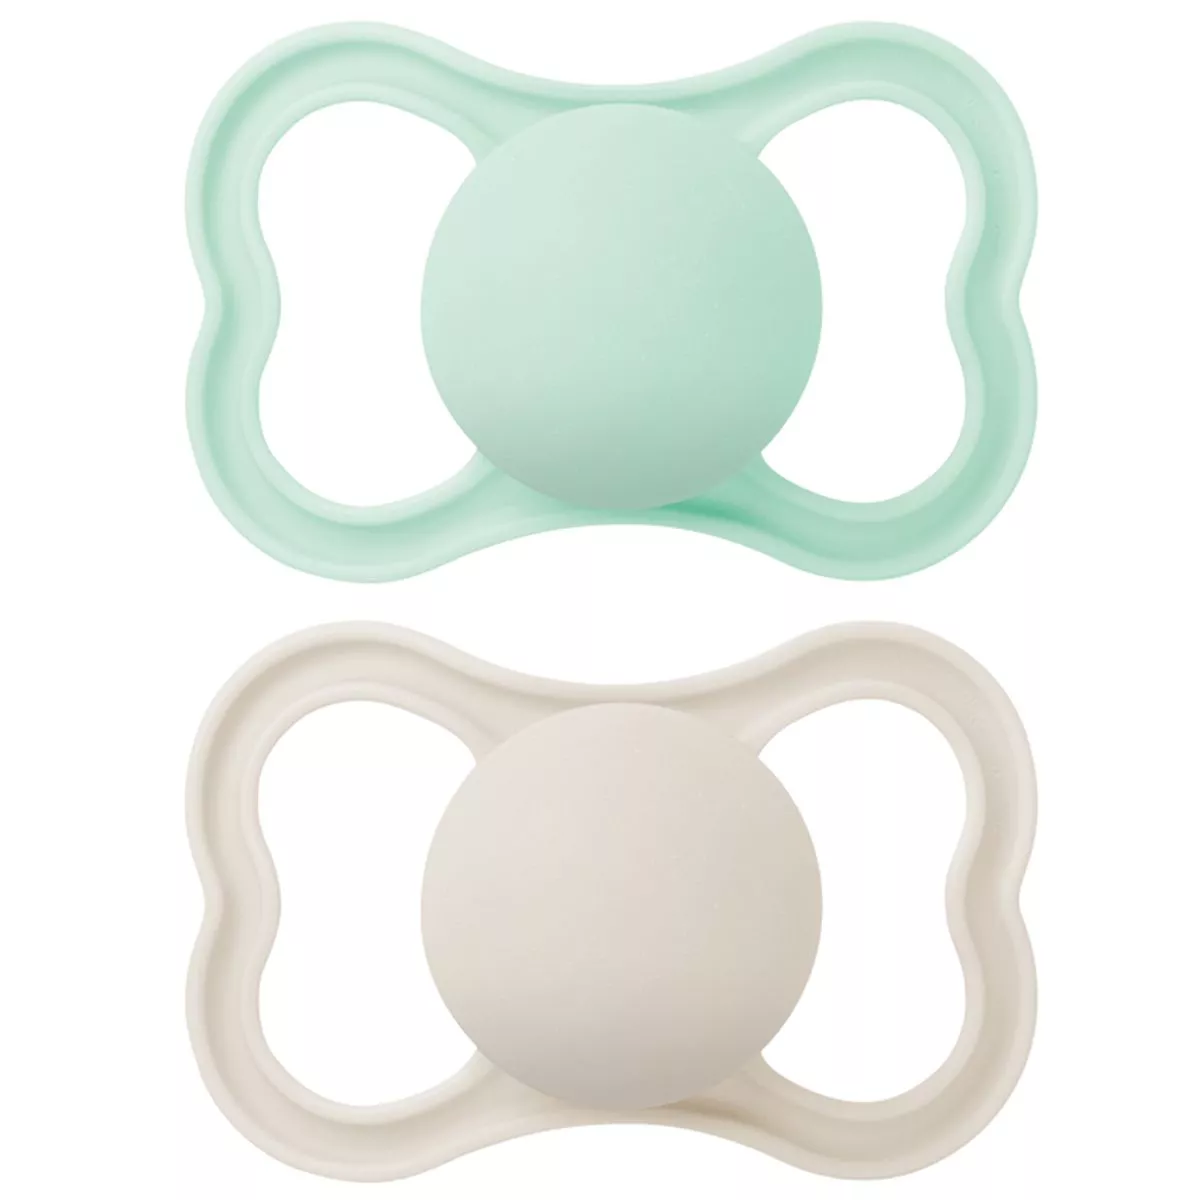 MAM Air Soother 6+ months, set of 2